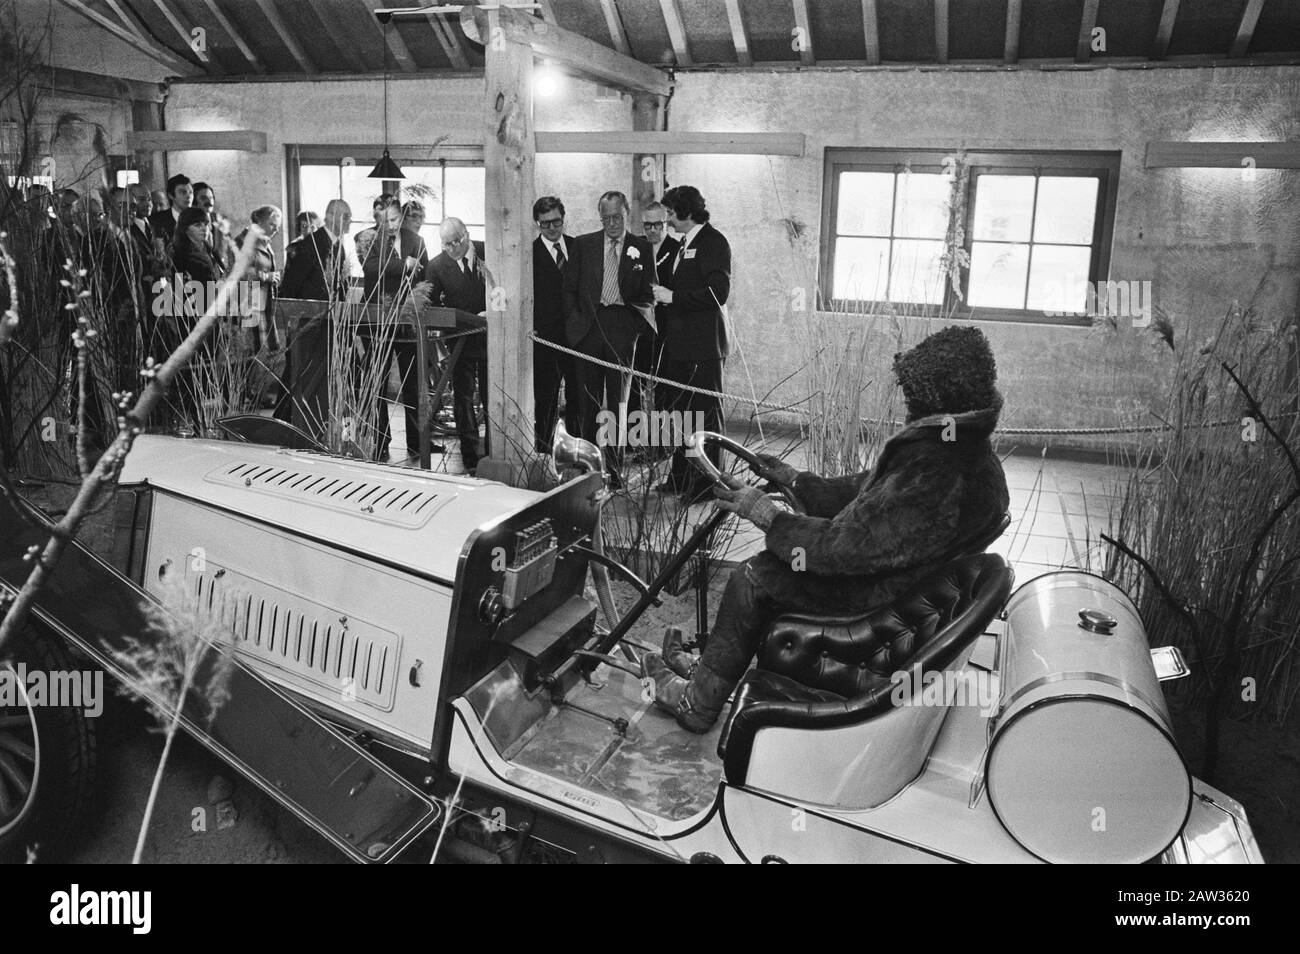 Prince Bernhard opened Nail Exhibition in Lips Autotron  Prince Bernhard viewing with interest one of the displayed oldtimers Date: April 4, 1977 Location: Drunen, Noord-Brabant Keywords: holes, princes, exhibitions person Name: Bernhard, prince Institution Name: Golden Coach, Lips Autotron Stock Photo